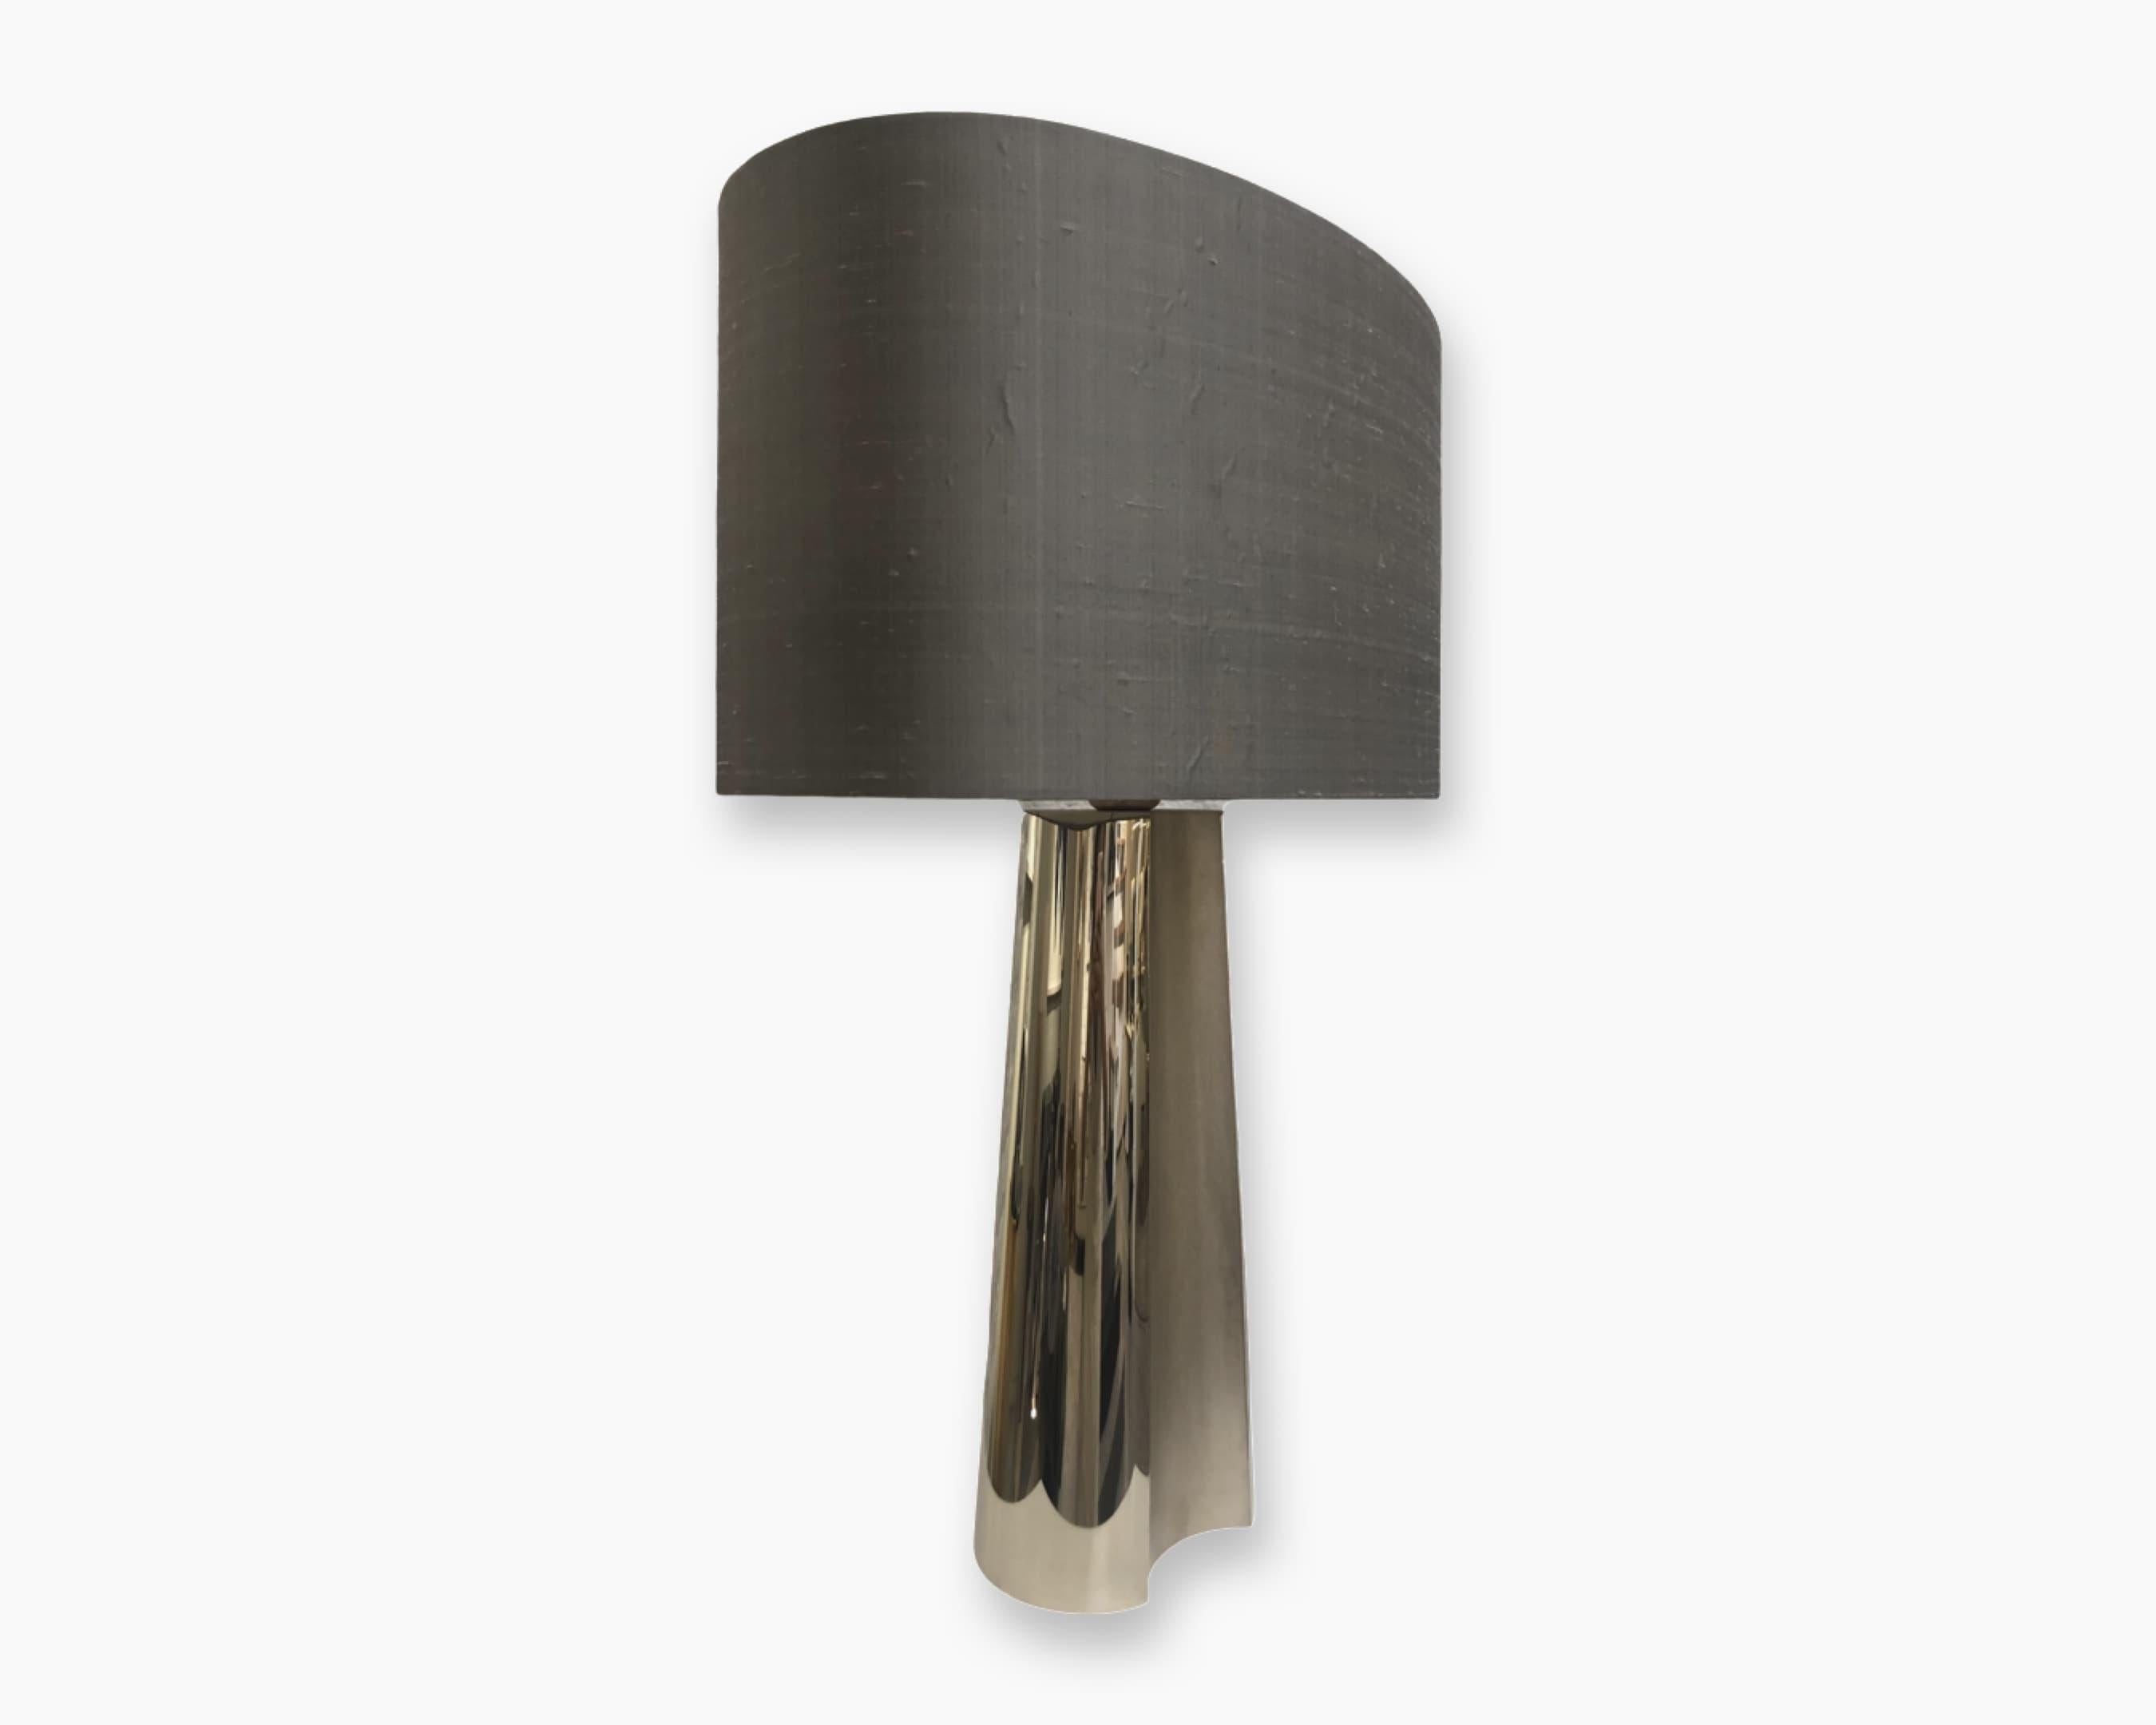 Concave Table Lamp, 2015
The concave table lamp features a subtle geometric design depicted in forged 24 karat champagne gold-plated metal. The curved rounded motif draws its inspiration from the early 20th century Streamline Moderne style of